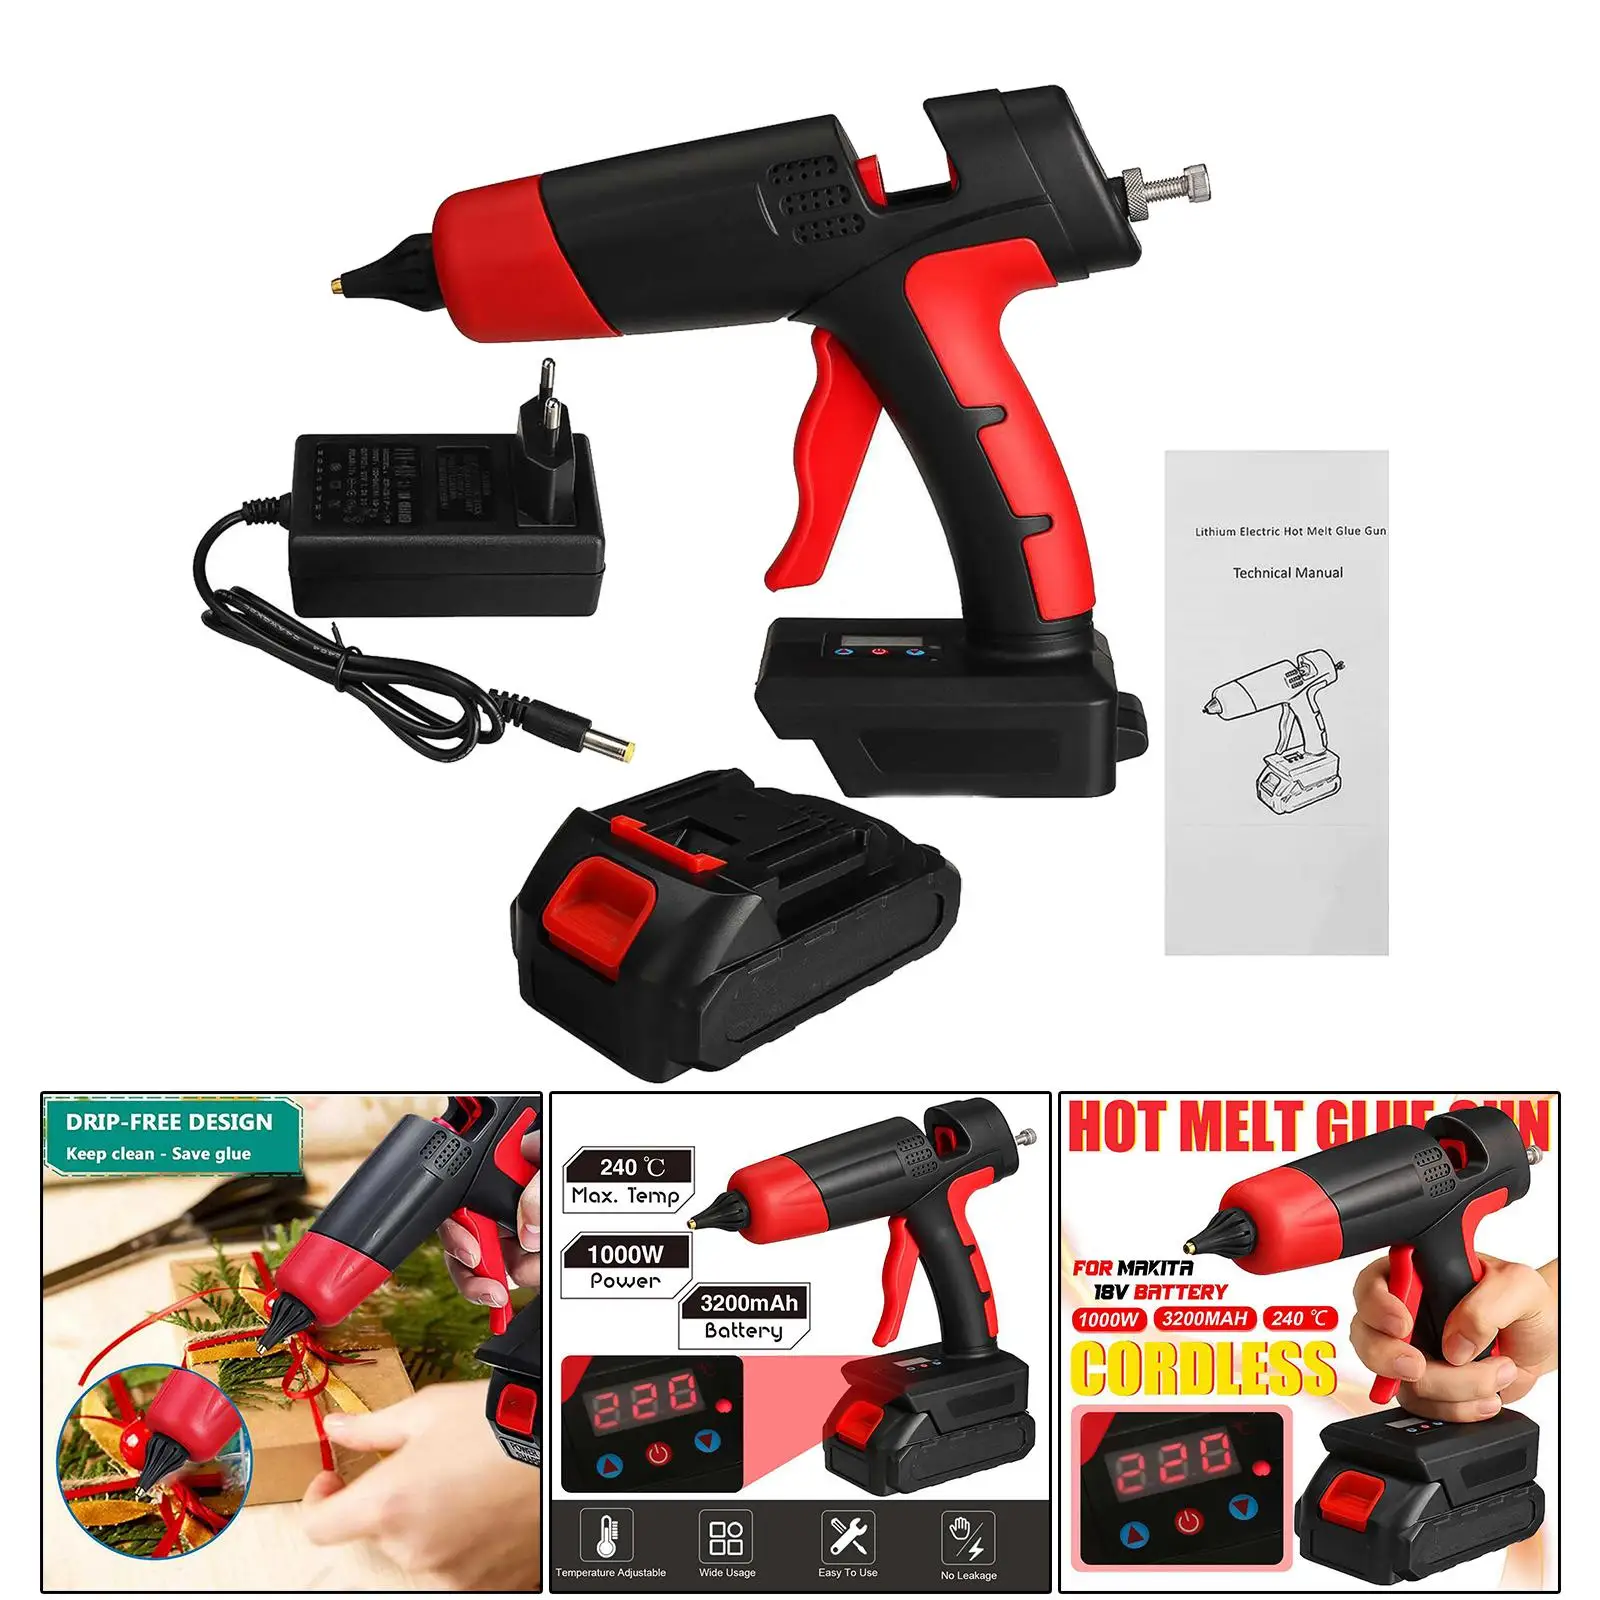 1000W Hot Melt Glue  Temperature Adjustable Rechargeable Digital Display Heavy Duty Cordless Hot Glue  for Home DIY Crafts